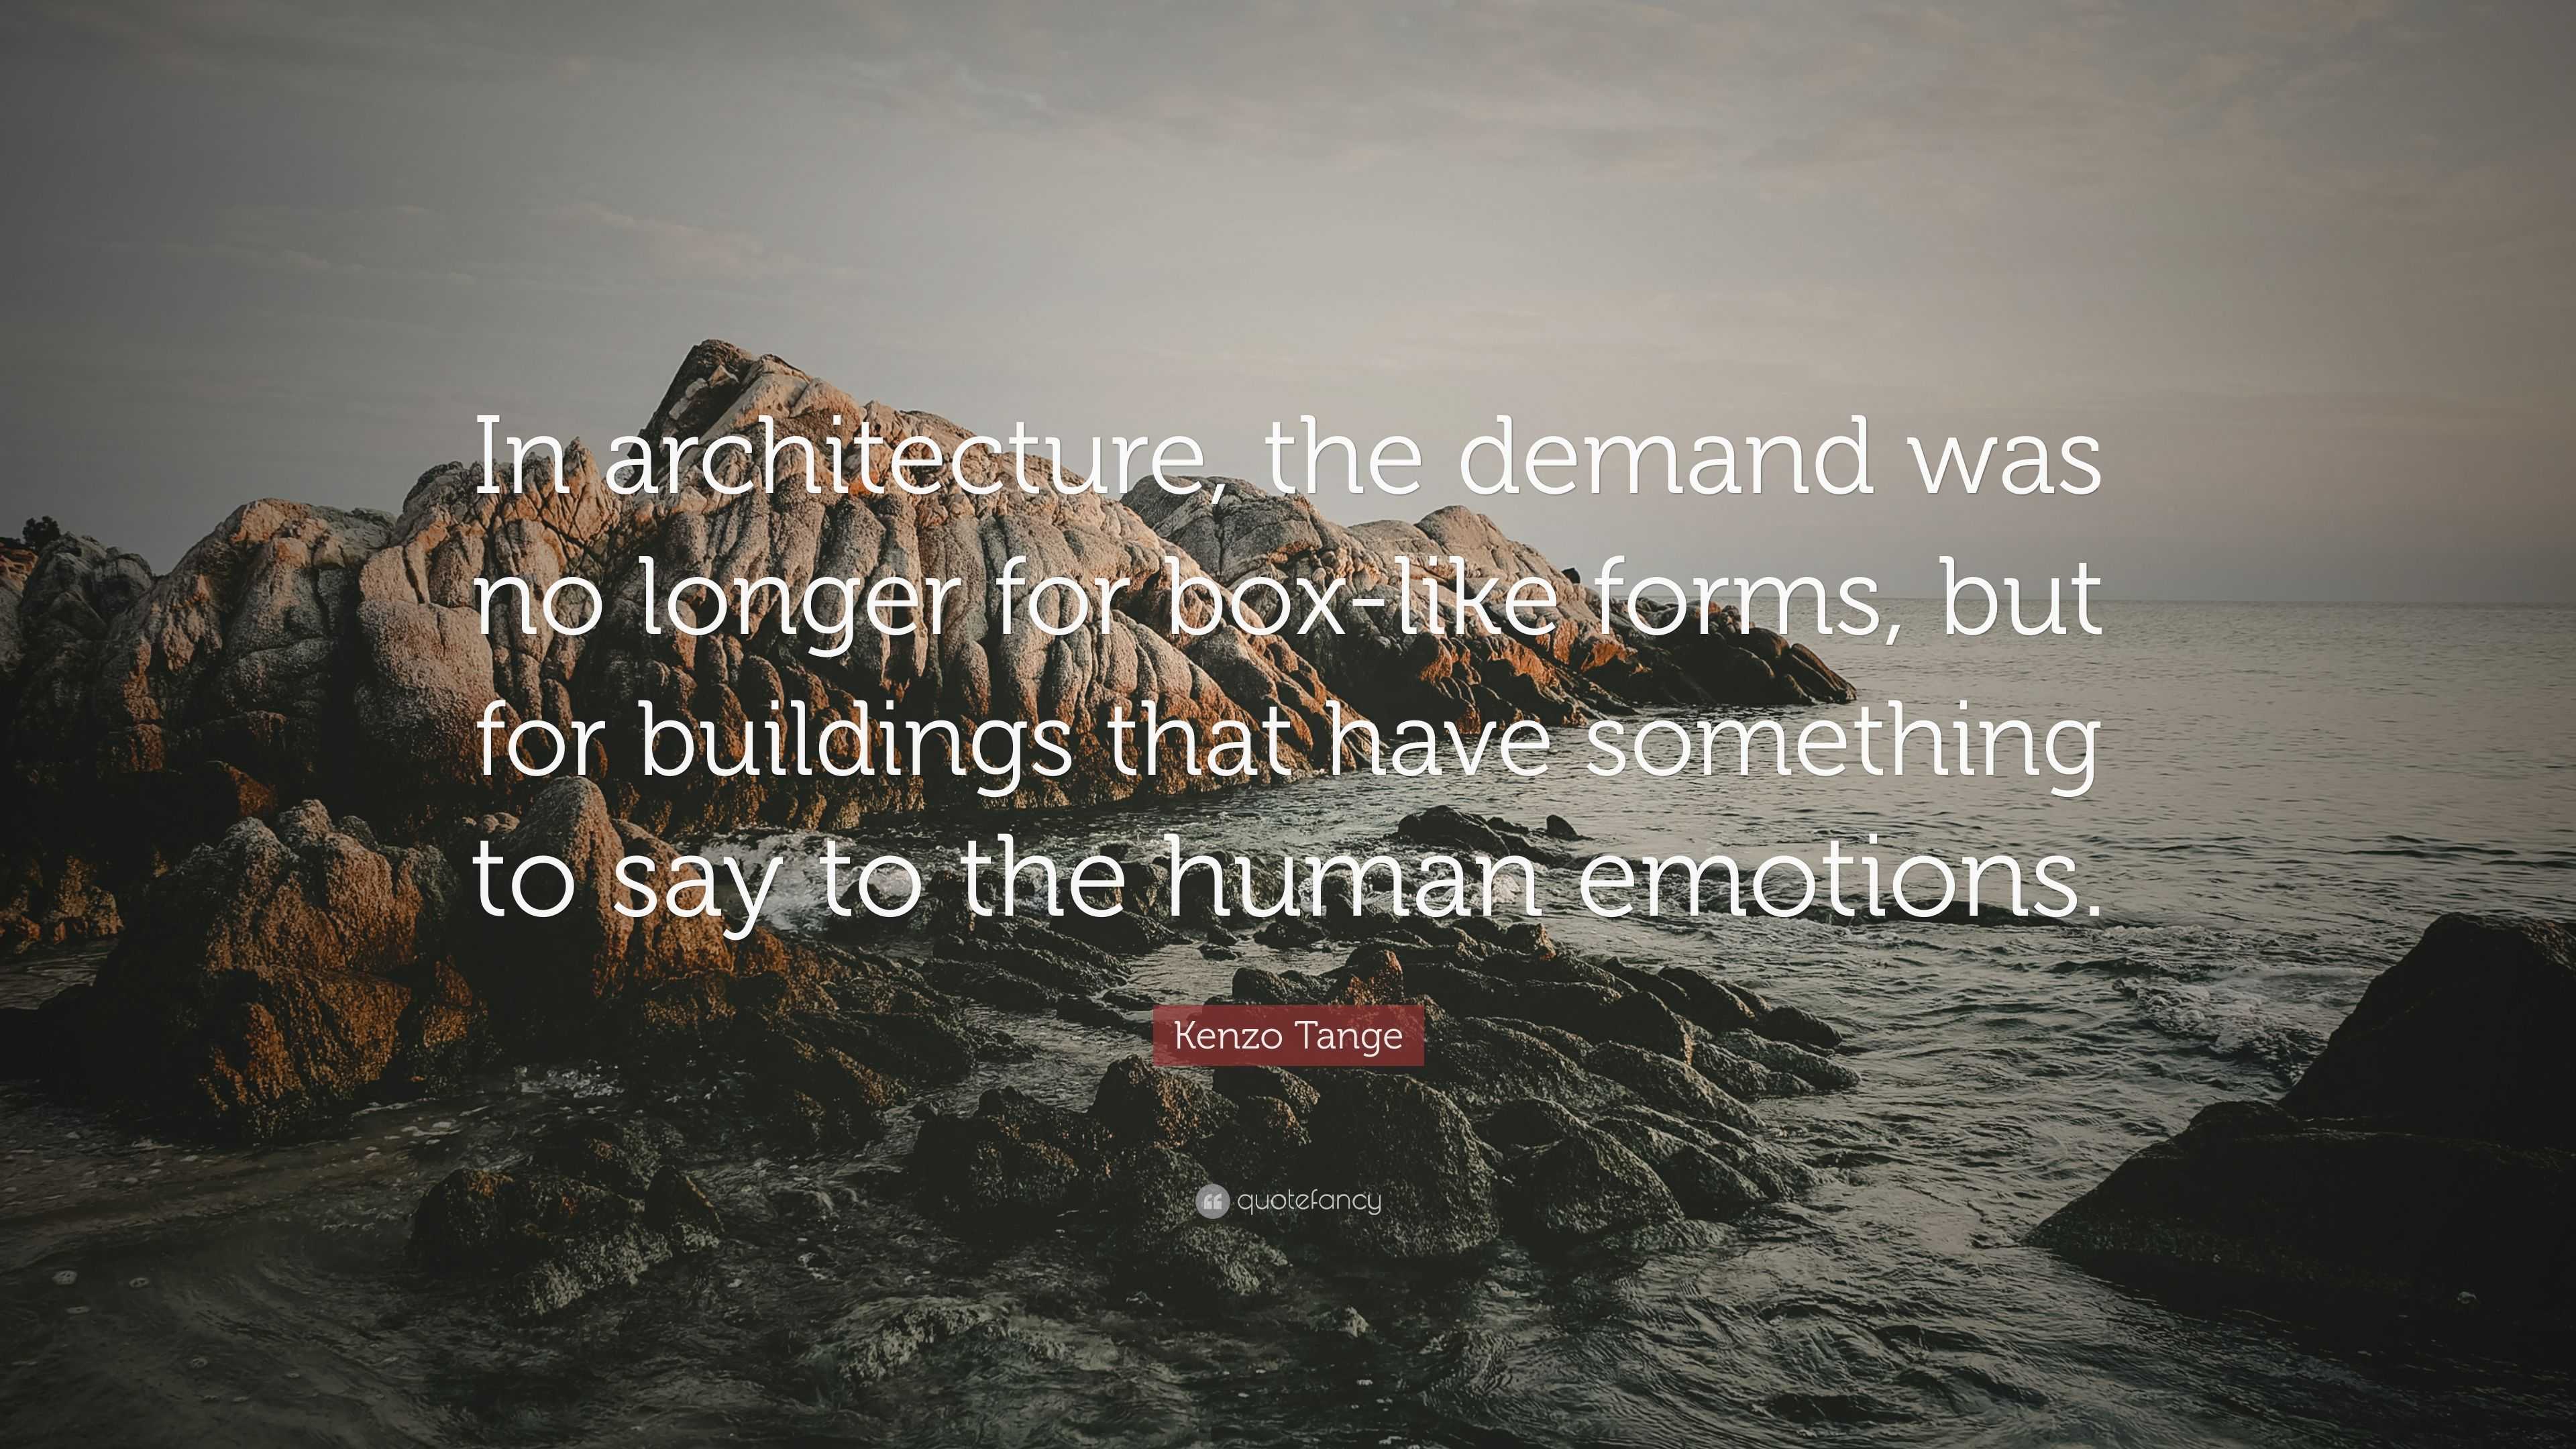 Kenzo Tange Quote: “In architecture, the demand was no longer for box ...